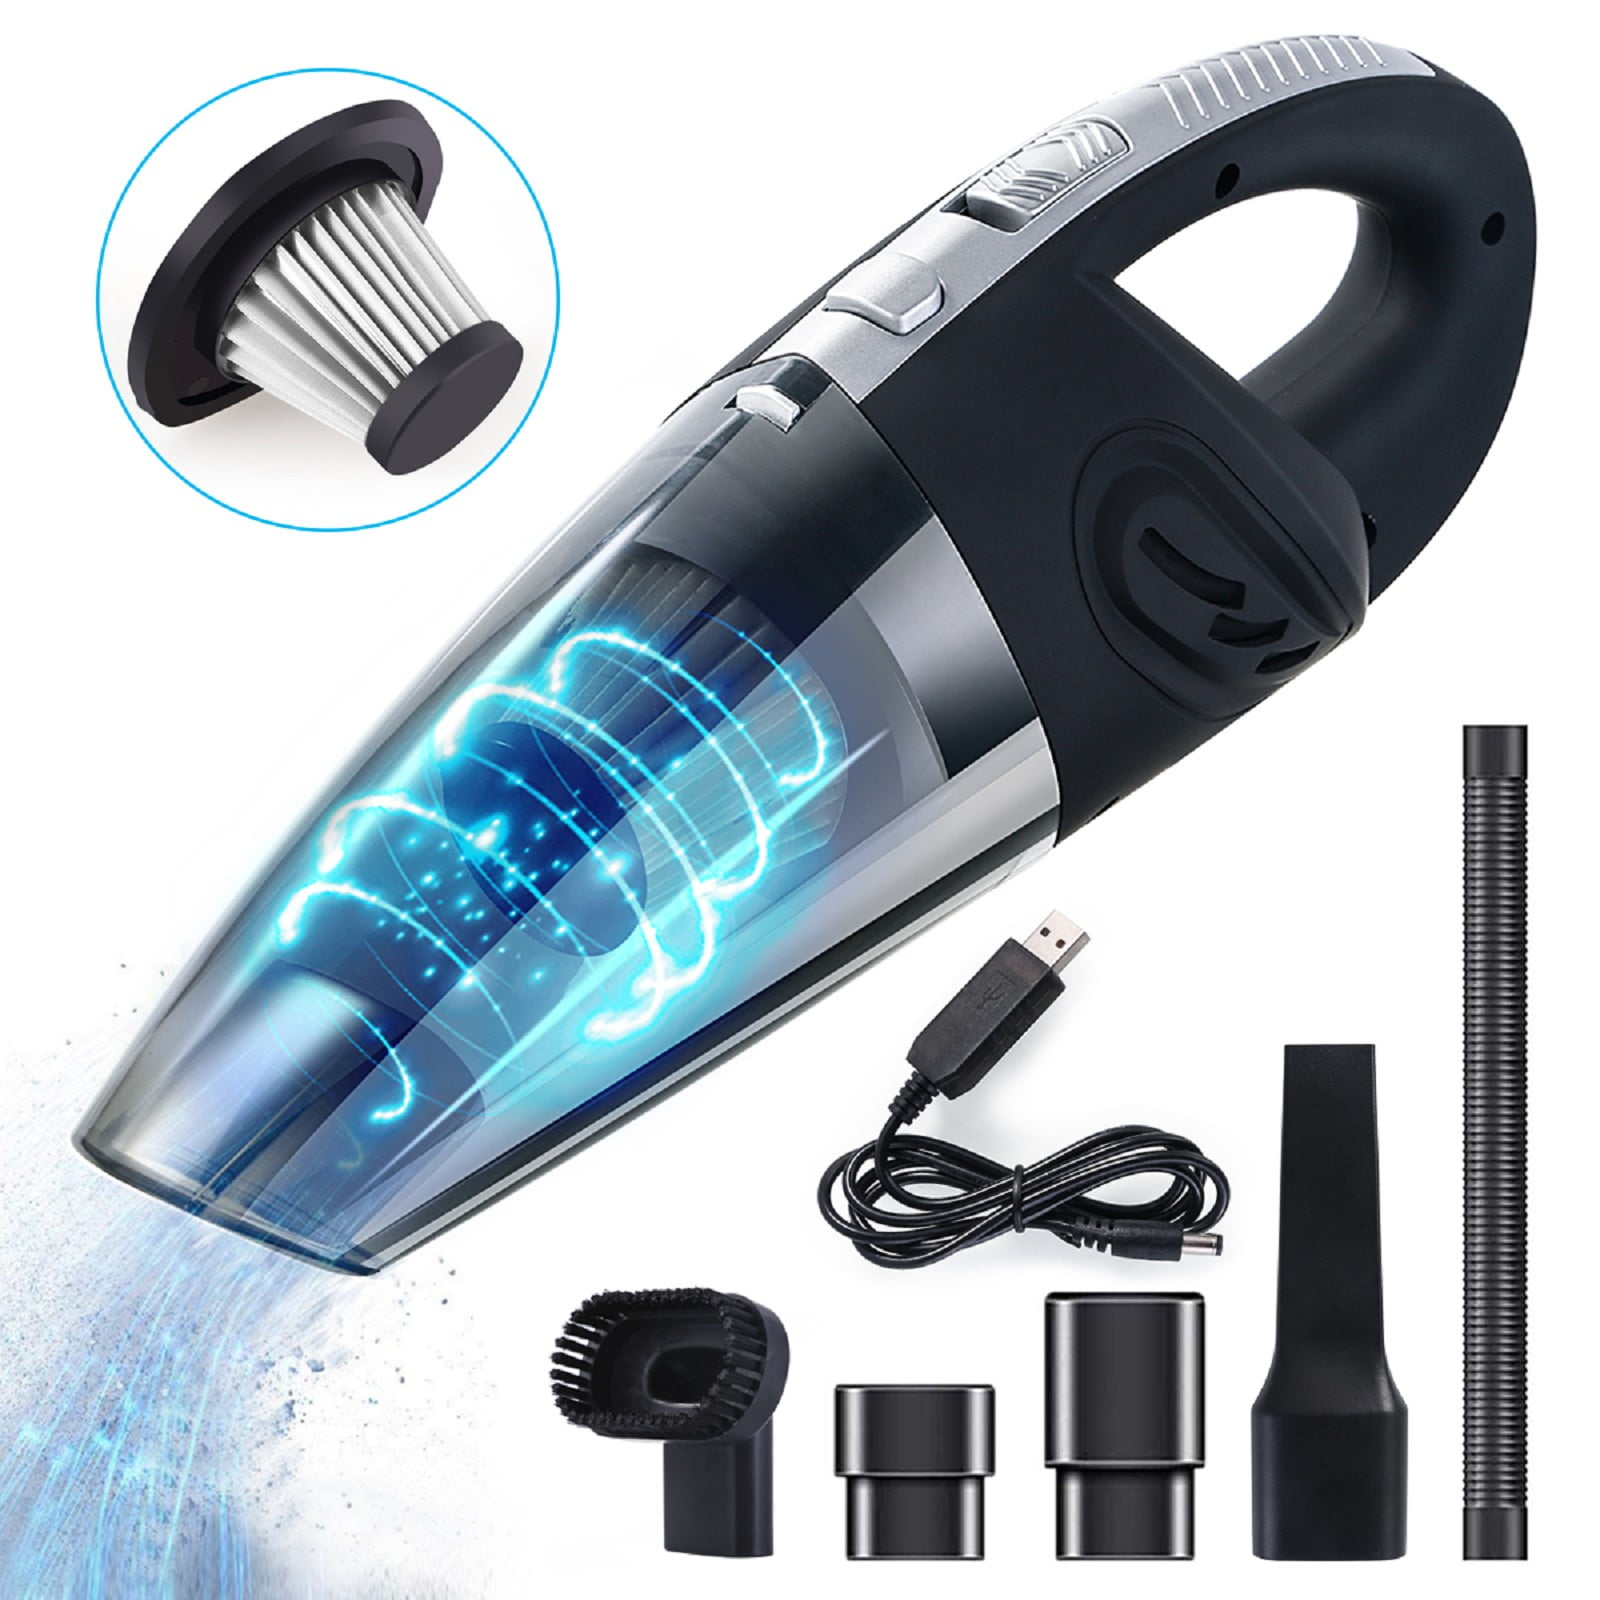 12V Hand Held Car Vacuum Cleaner Wet Dry Mini Portable For Auto Small Duster ξ 